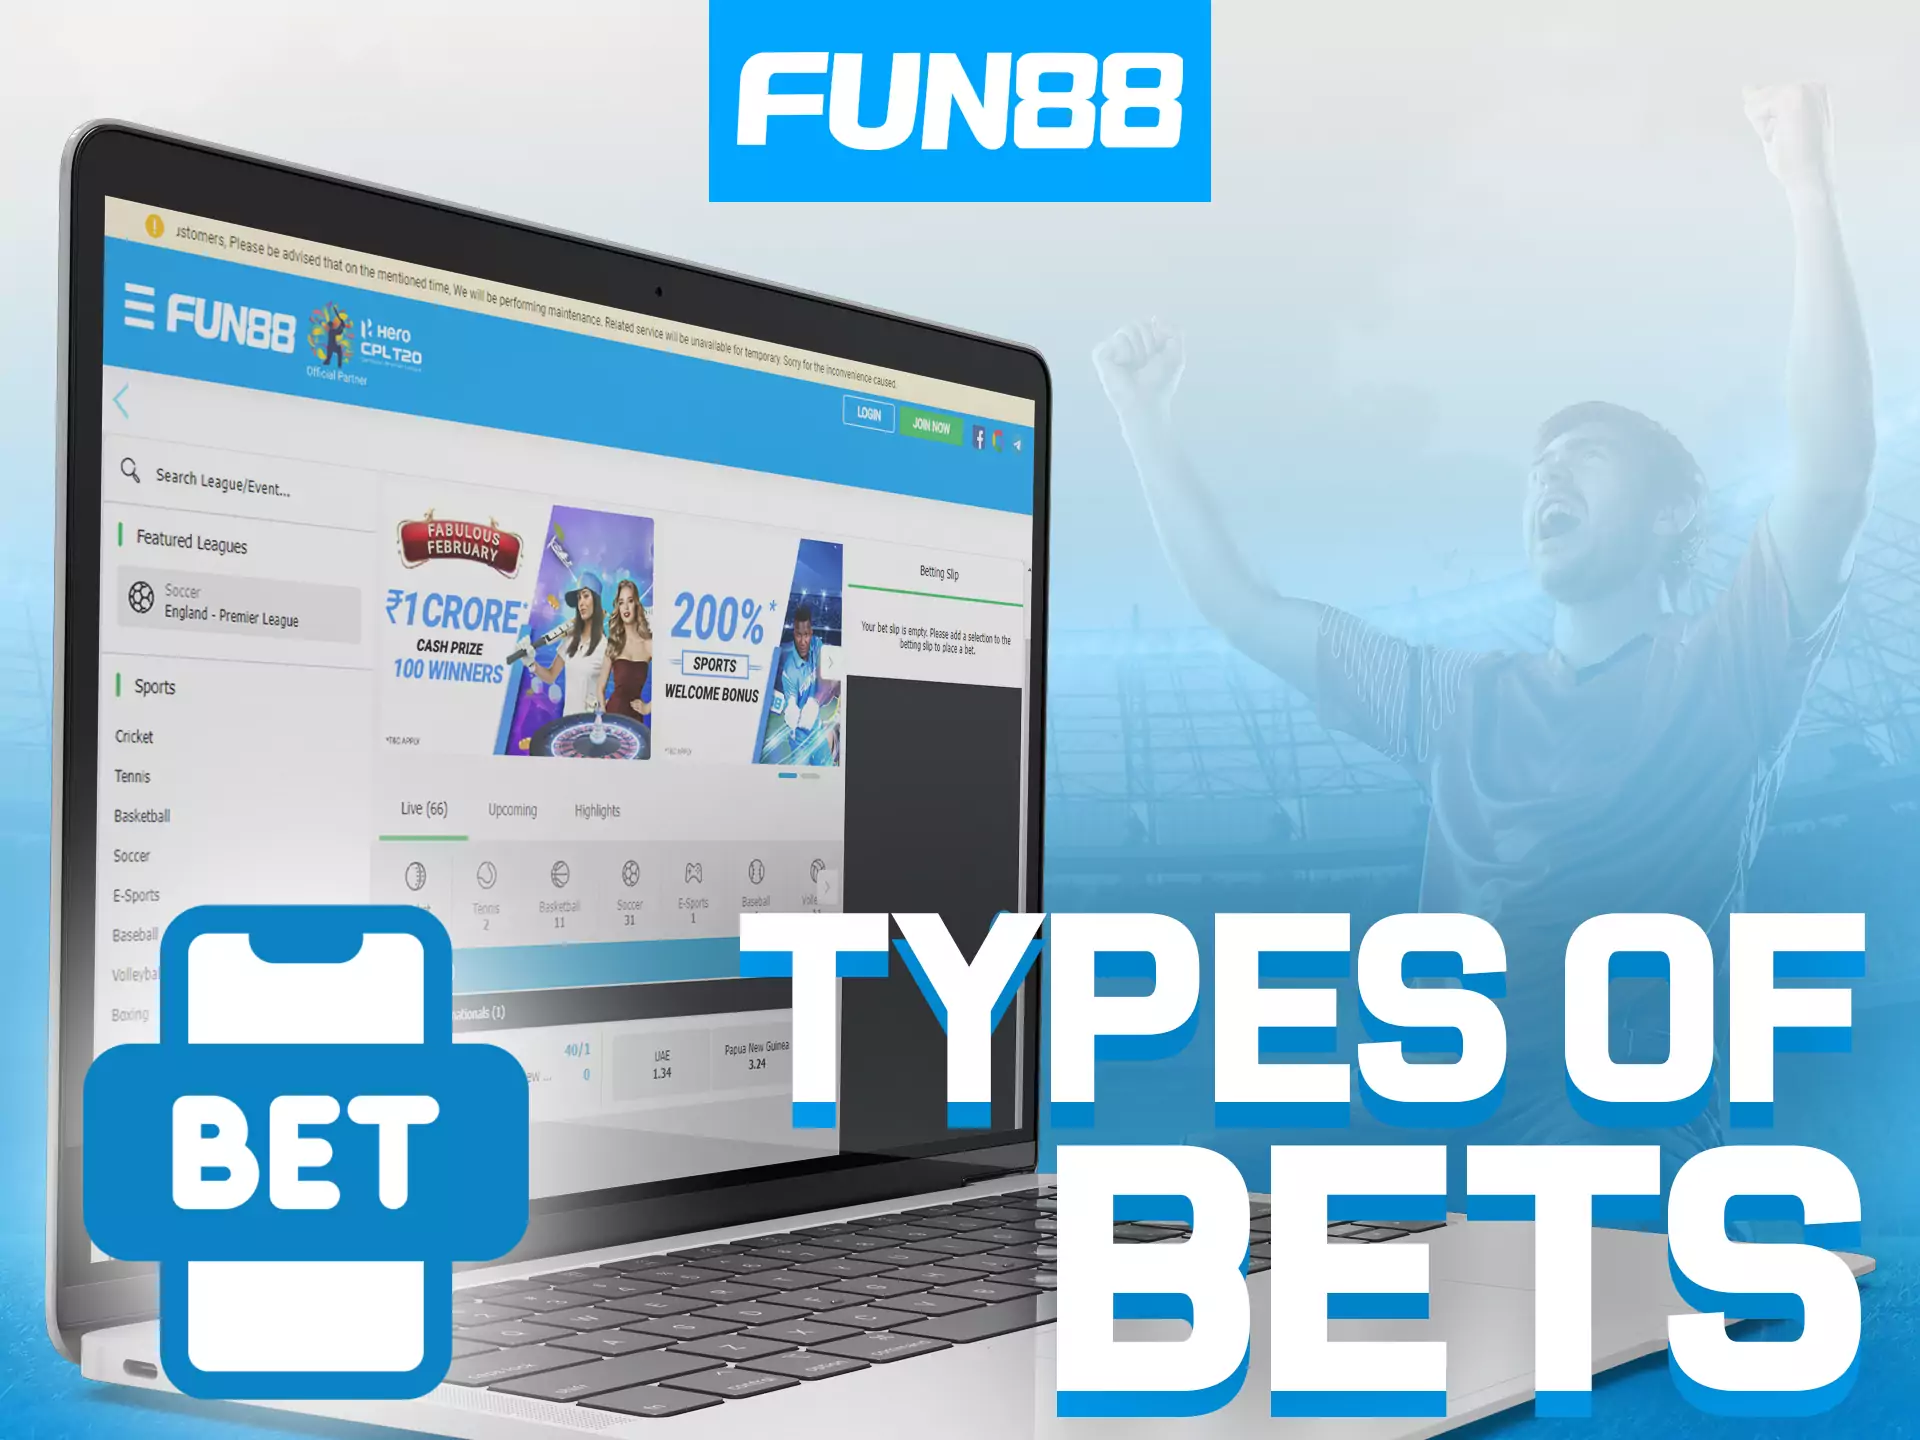 At Fun88, try different types of bets.